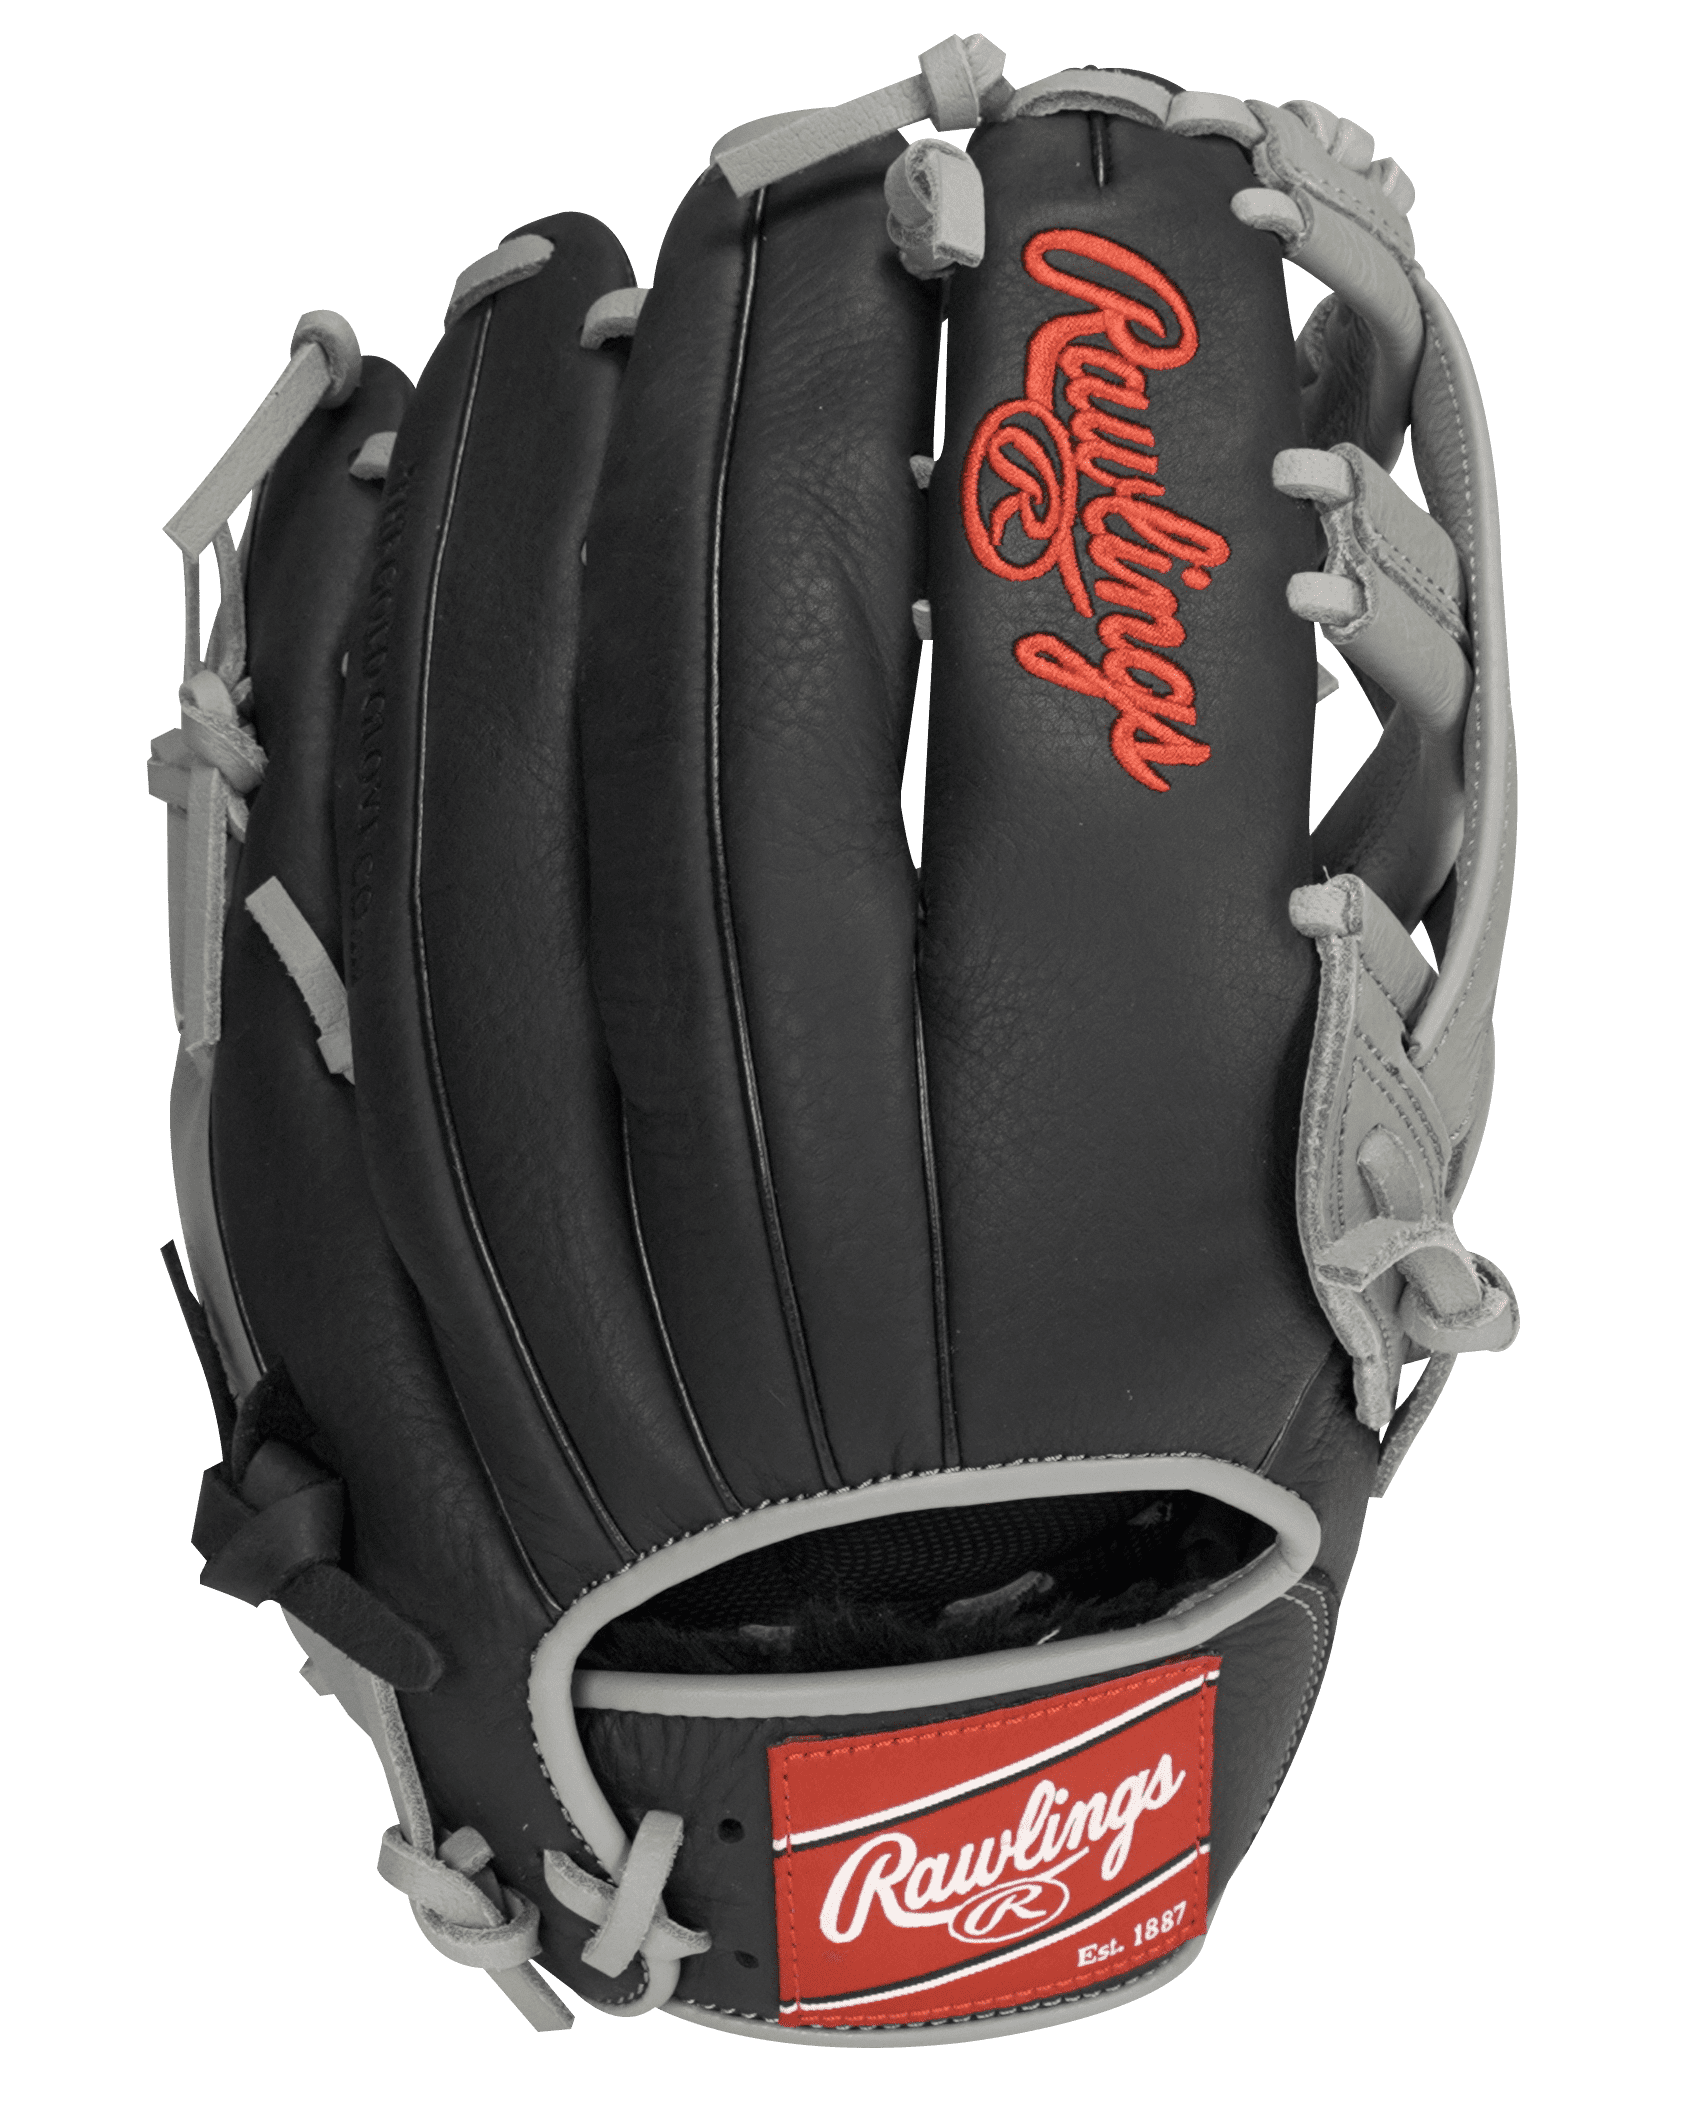 Rawlings PL115G Youth Baseball Glove Without Tags LH Thrower Bin14 for sale online 